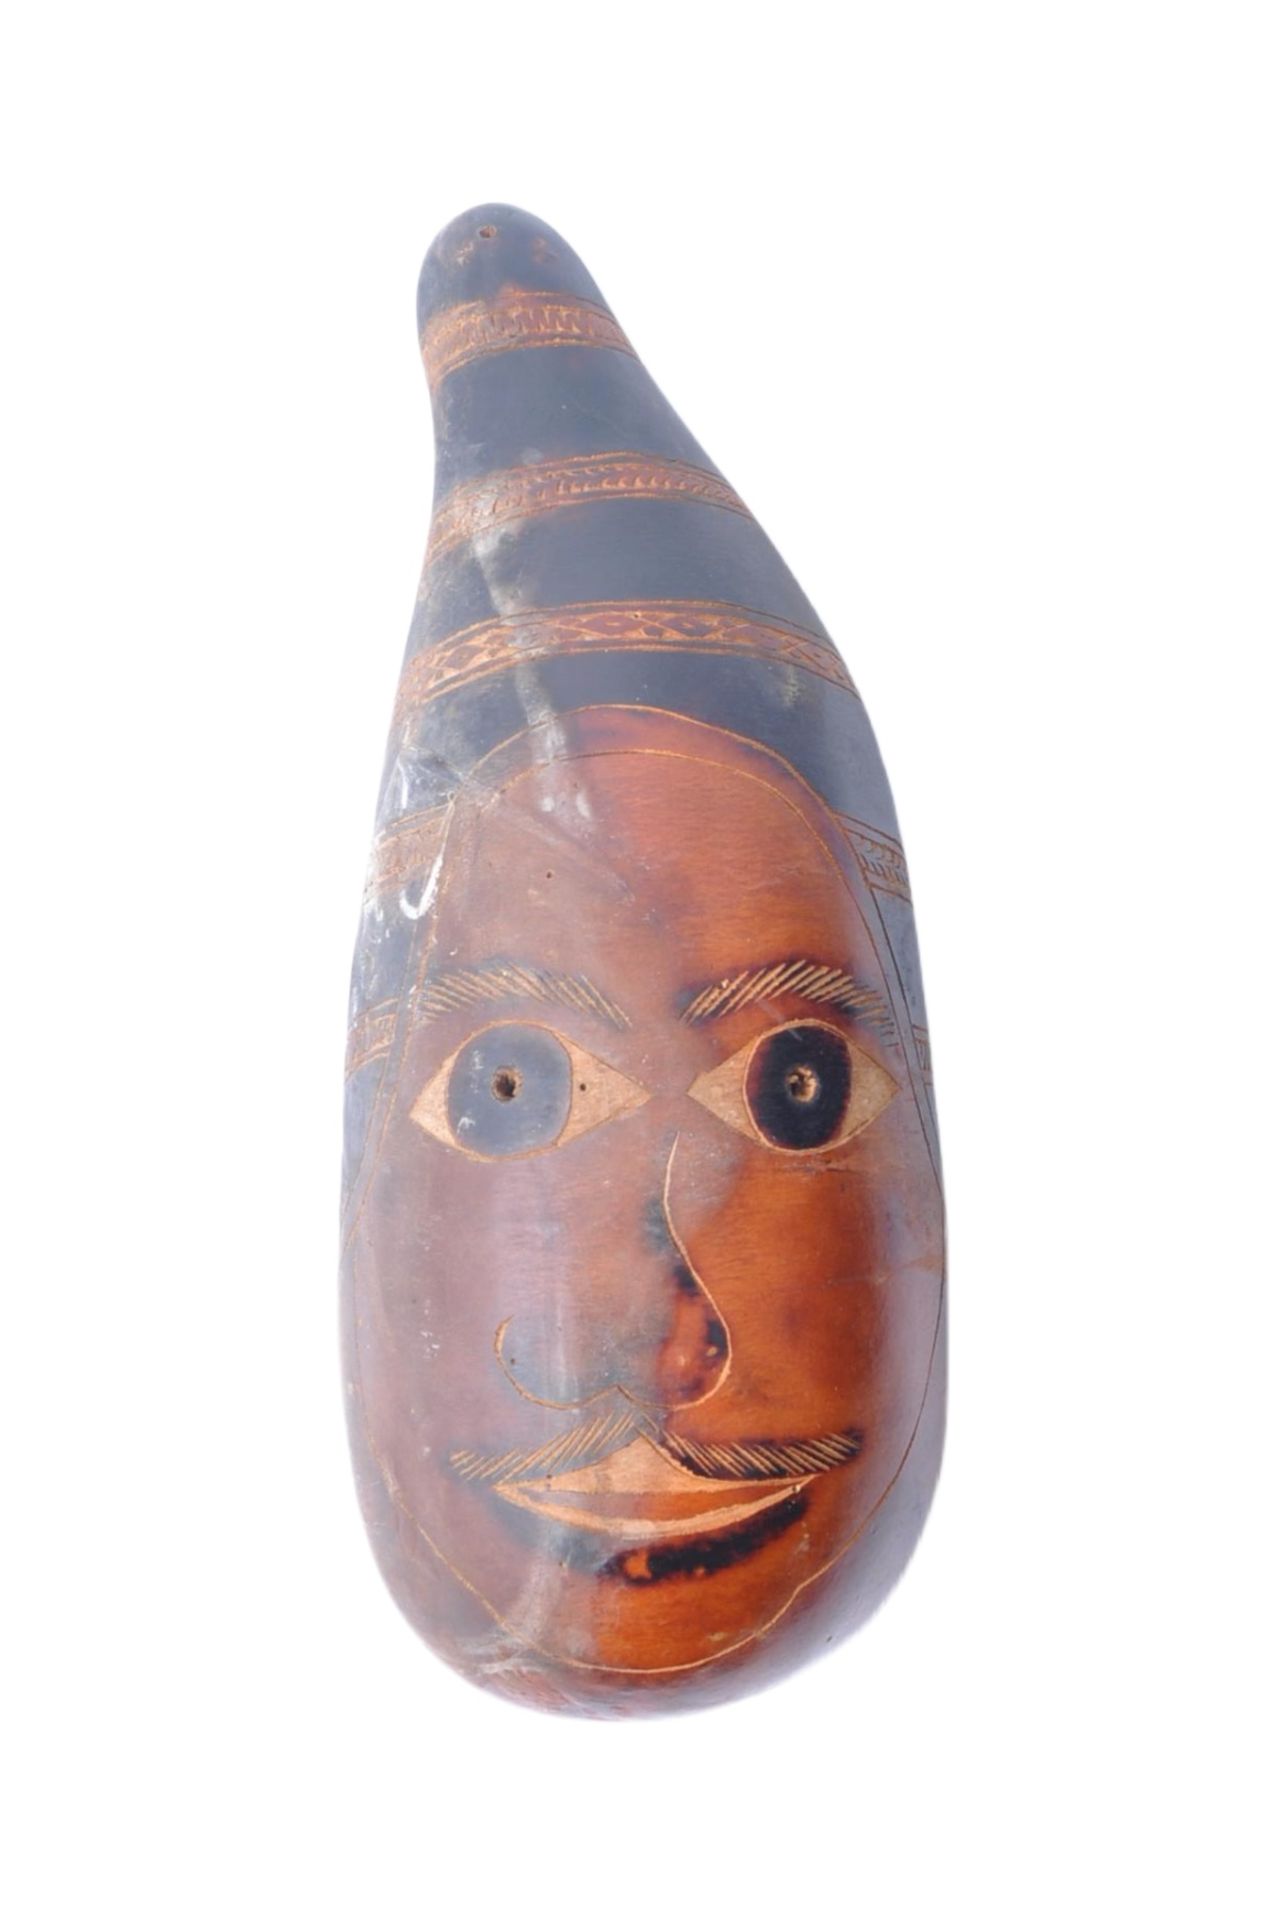 20TH CENTURY INDIAN GOURD MASK